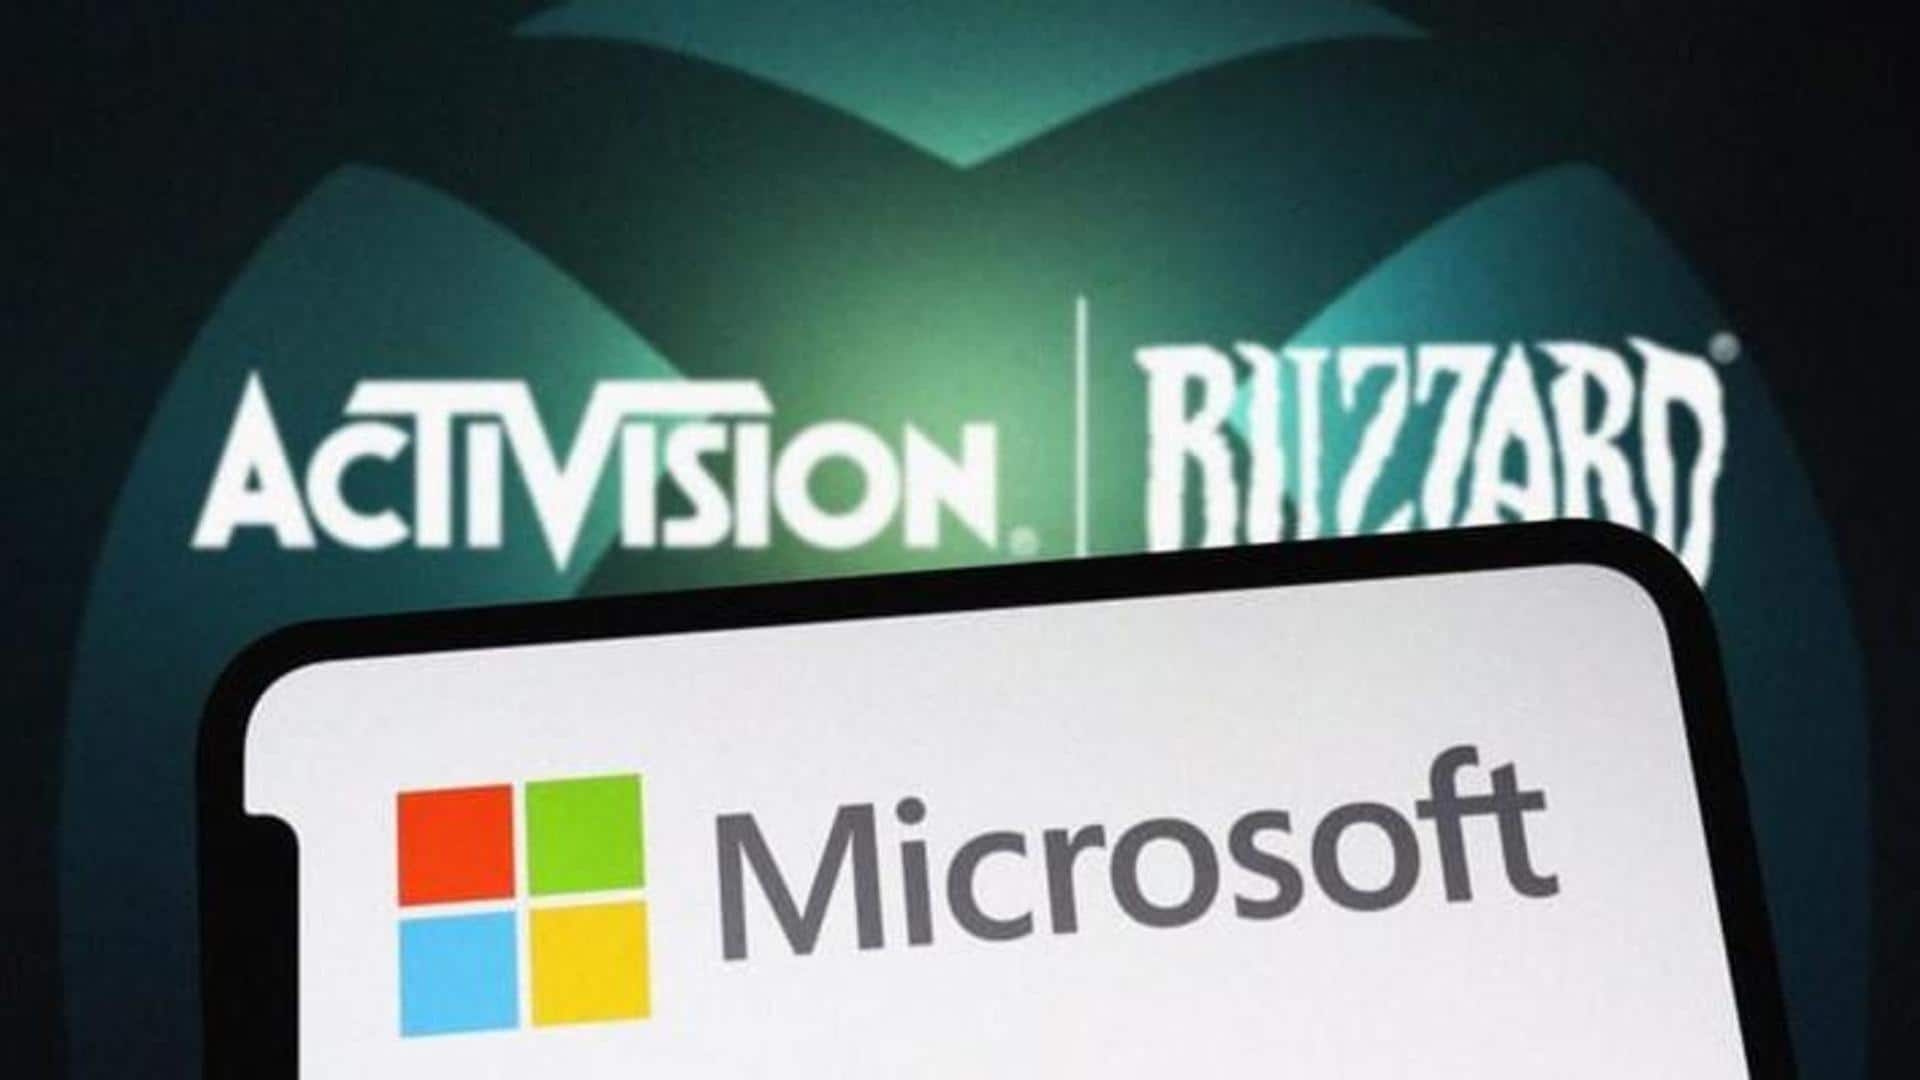 Microsoft appeals UK watchdog's decision to block Activision acquisition